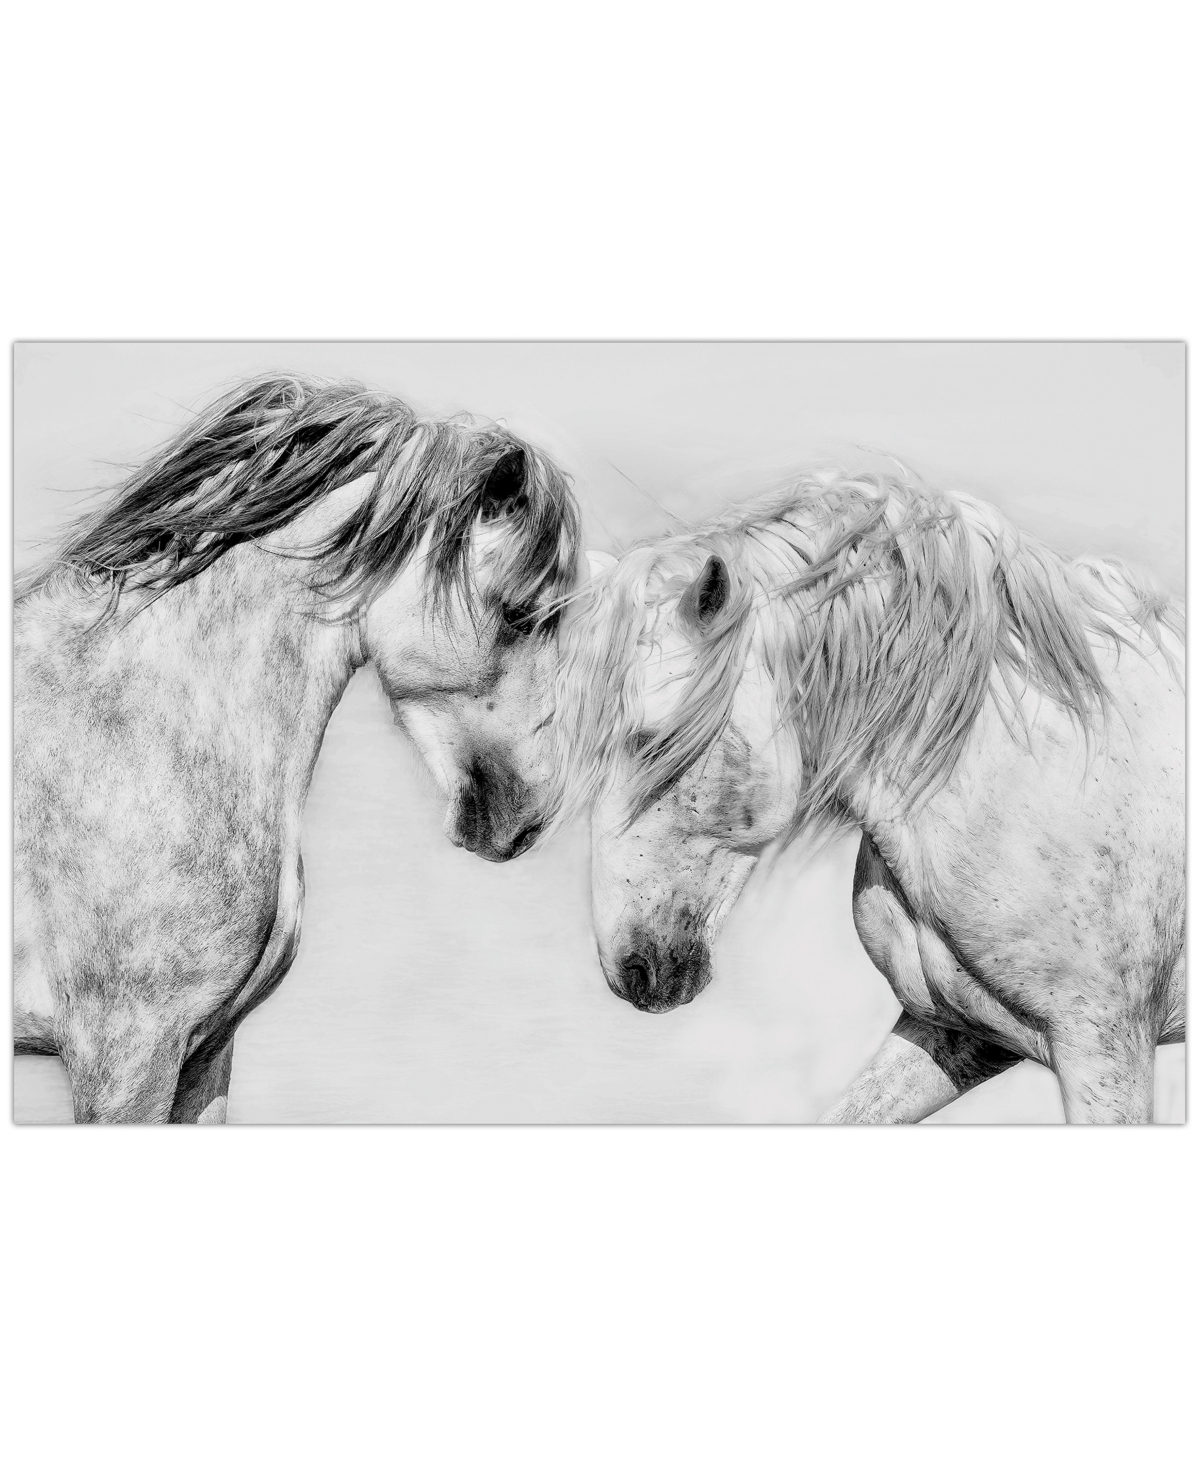 Empire Art Direct Caballo Blanco Equine Frameless Free Floating Tempered Glass Panel Graphic Wall Art In Gray